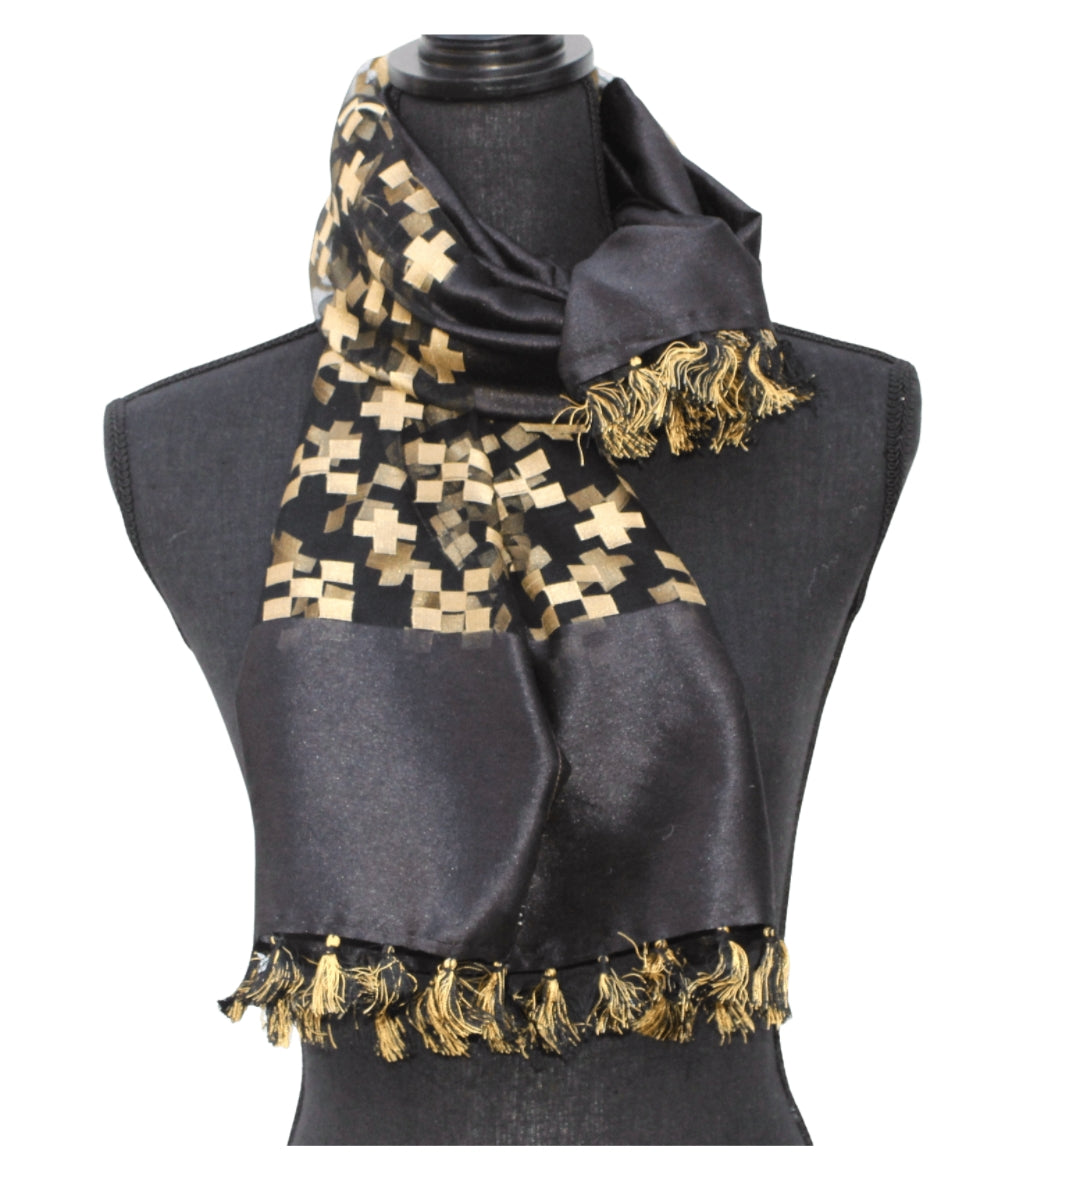 The Upcycled Luxurious Silk Scarf Patterned - Black and gold crosses